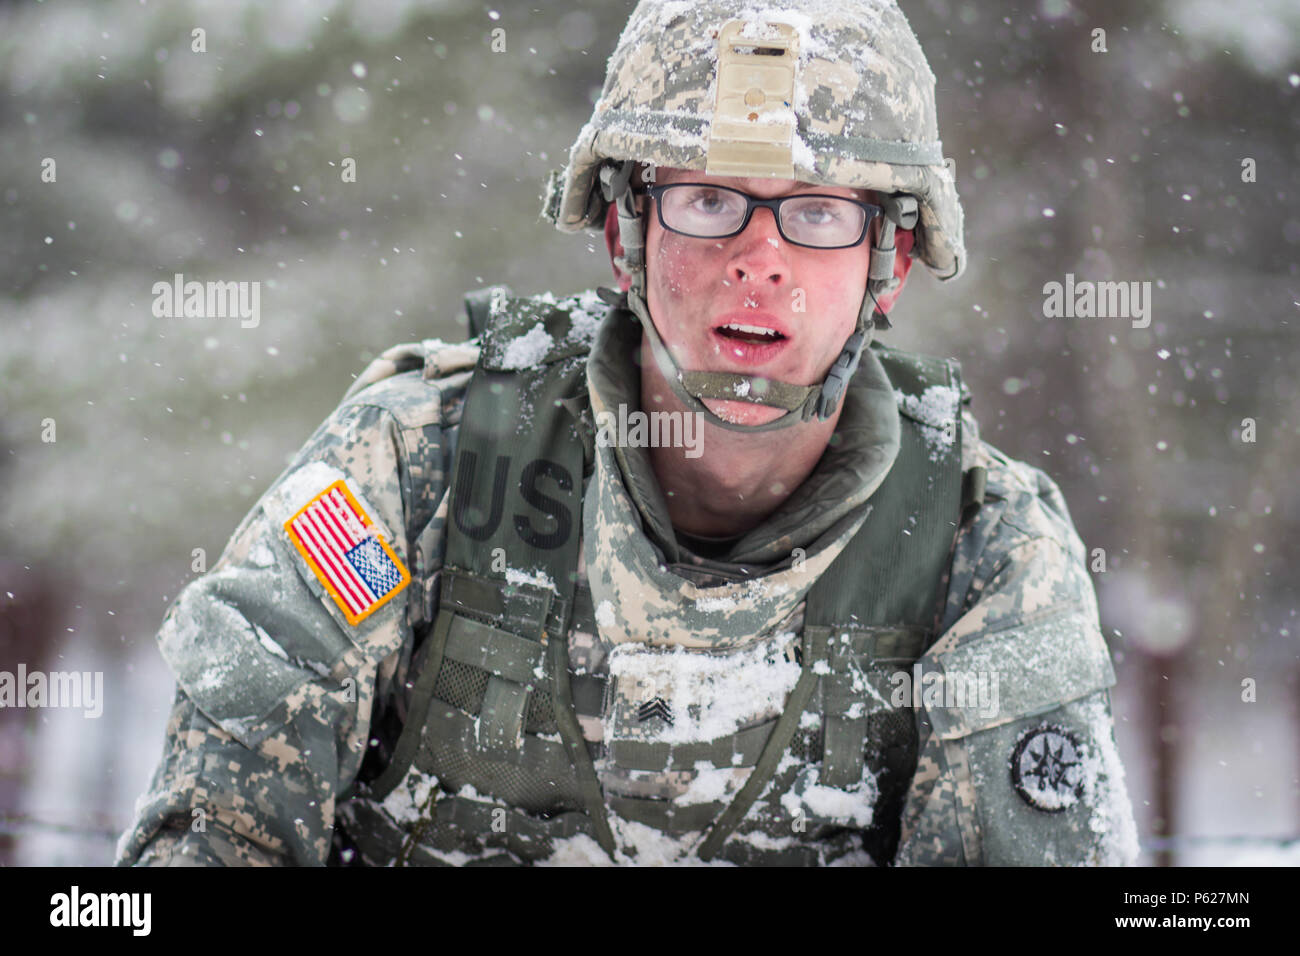 Sgt. John Dana, winner in the non-commissioned officer category, demonstrates an Army Warrior Task as snow falls on the first day of competition of the 377th Theater Sustainment Command Best Warrior Competition. Dana represented the 316th Sustainment Command (Expeditionary) in the competition. Dana, a native of Naugatuck, Conn., was among 11 Soldiers from across the 377th TSC vying for the command’s Best Warrior title and the opportunity to represent the command at the U.S. Army Reserve Command competition at Fort Bragg, N.C. May 1-7, 2016. Stock Photo